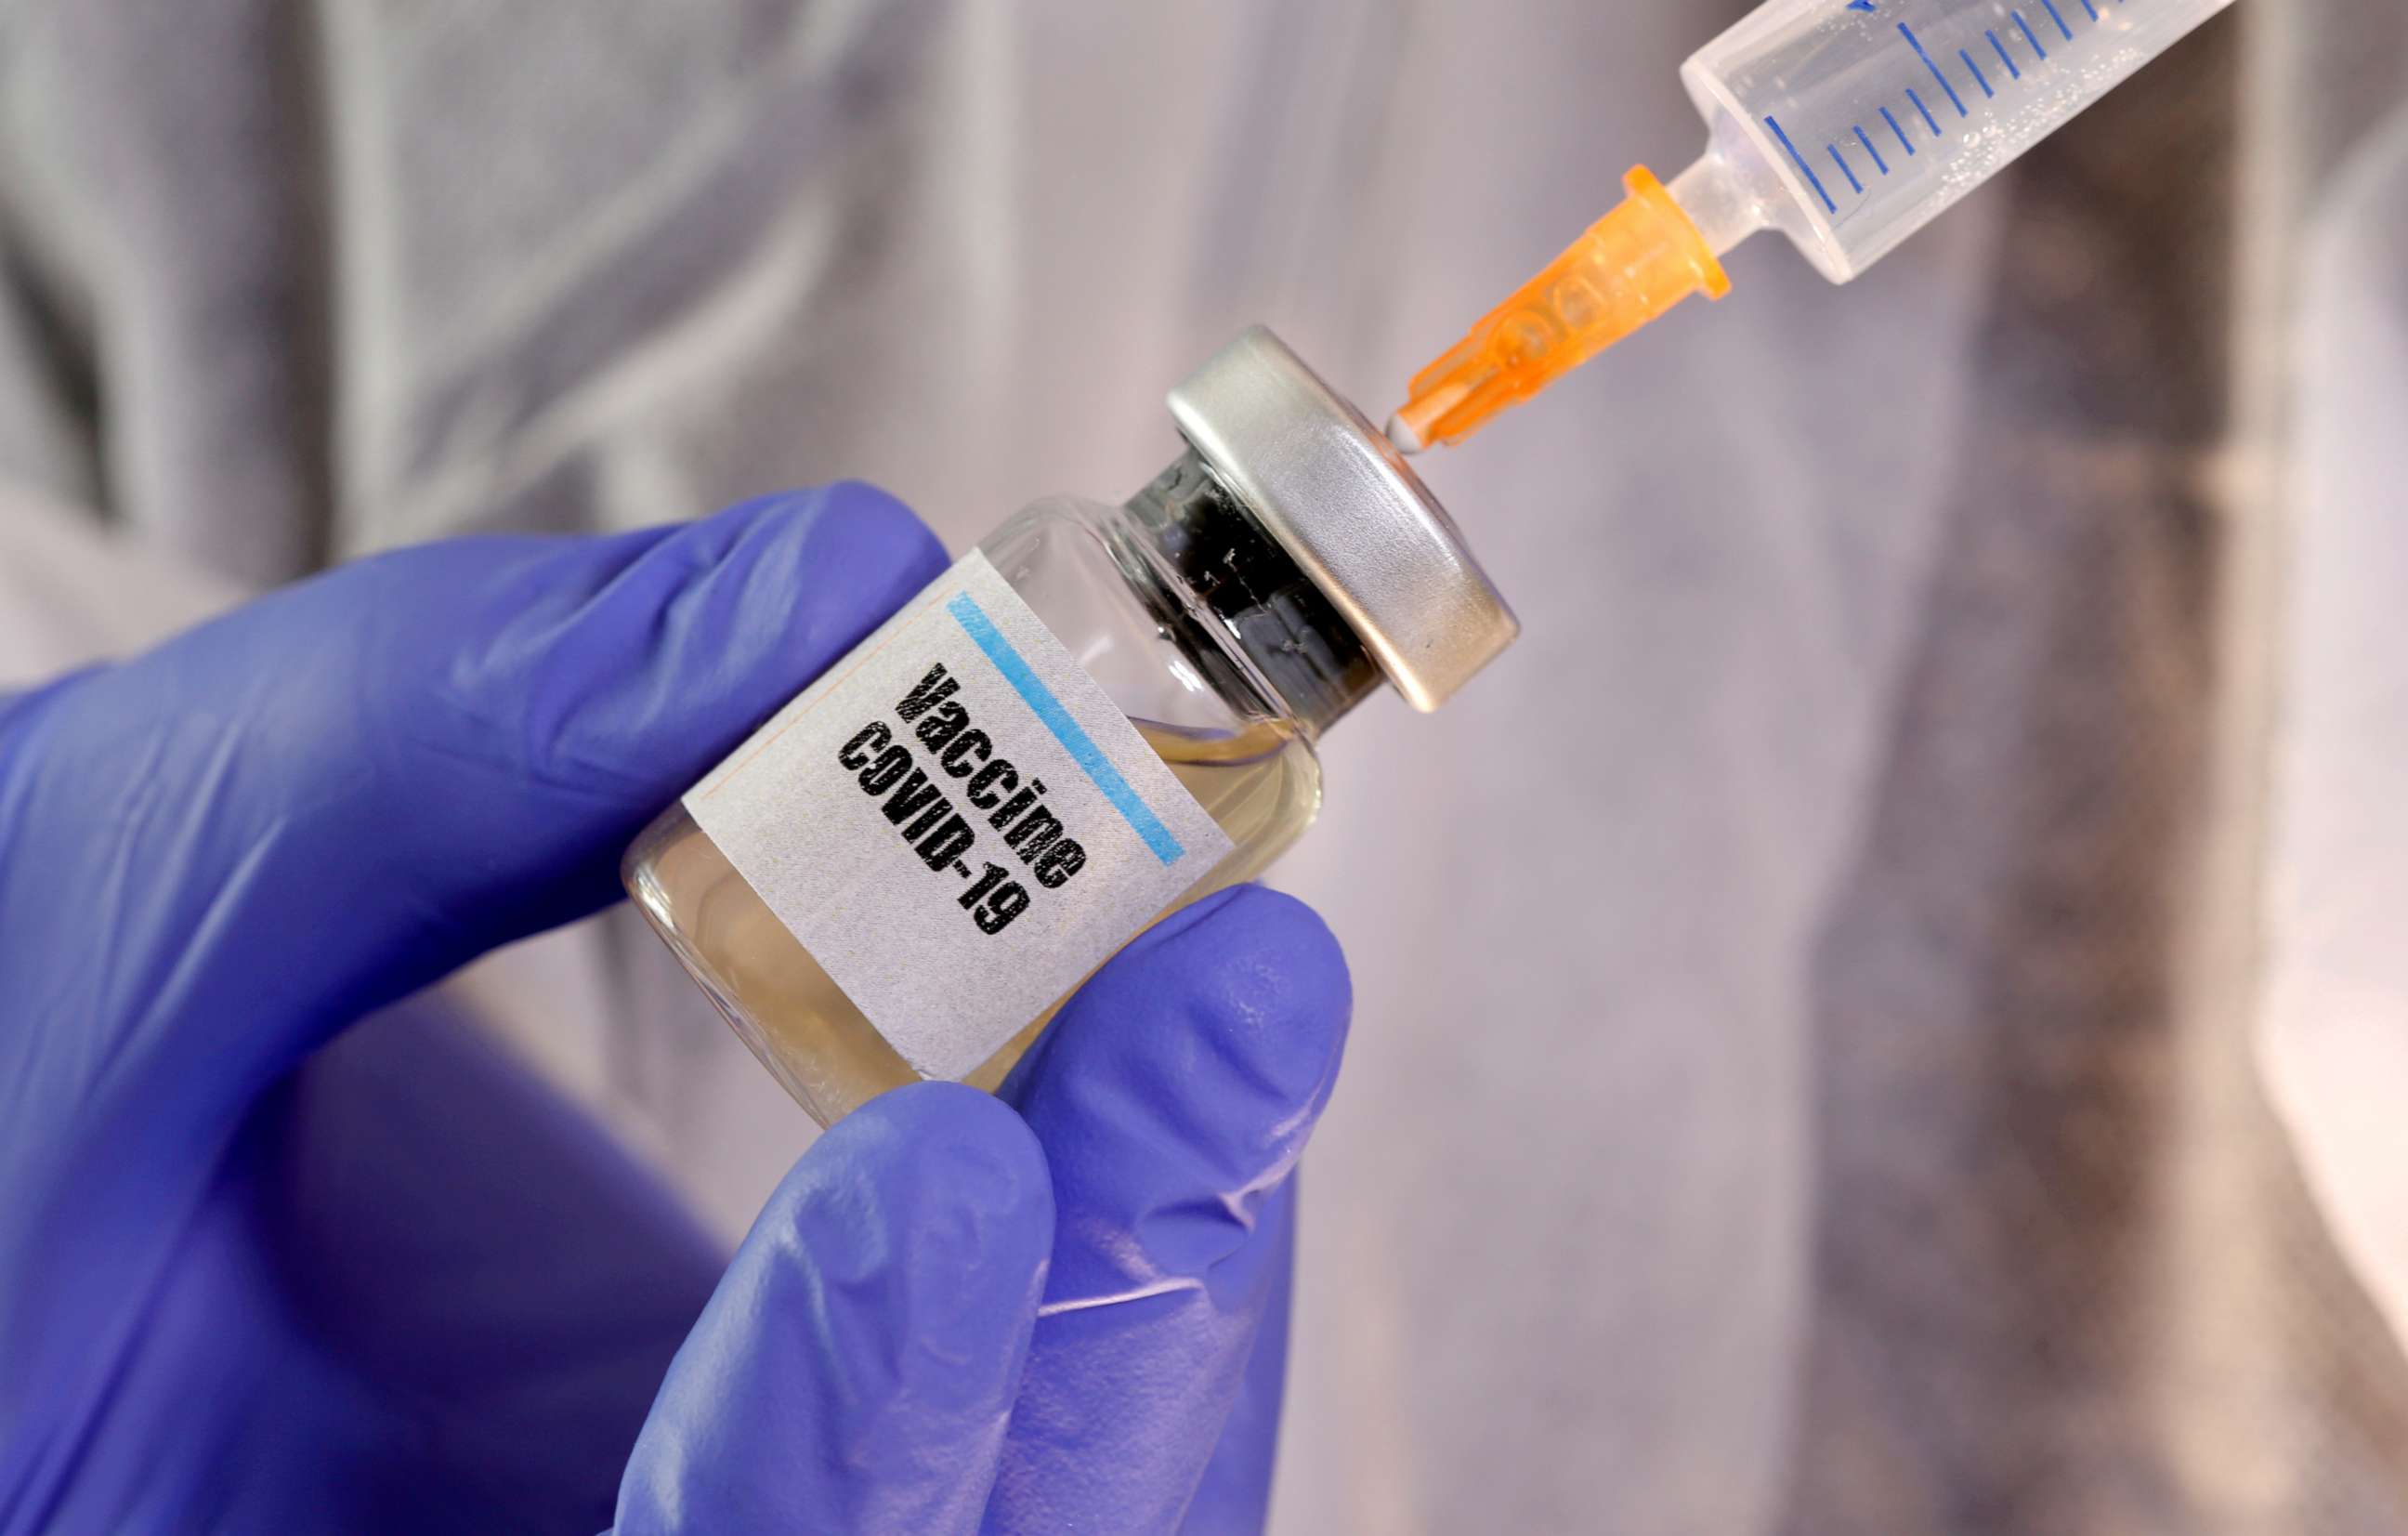 PHOTO: A medical syringe is inserted into a small bottle labeled "Vaccine COVID-19" in this illustration taken April 10, 2020.